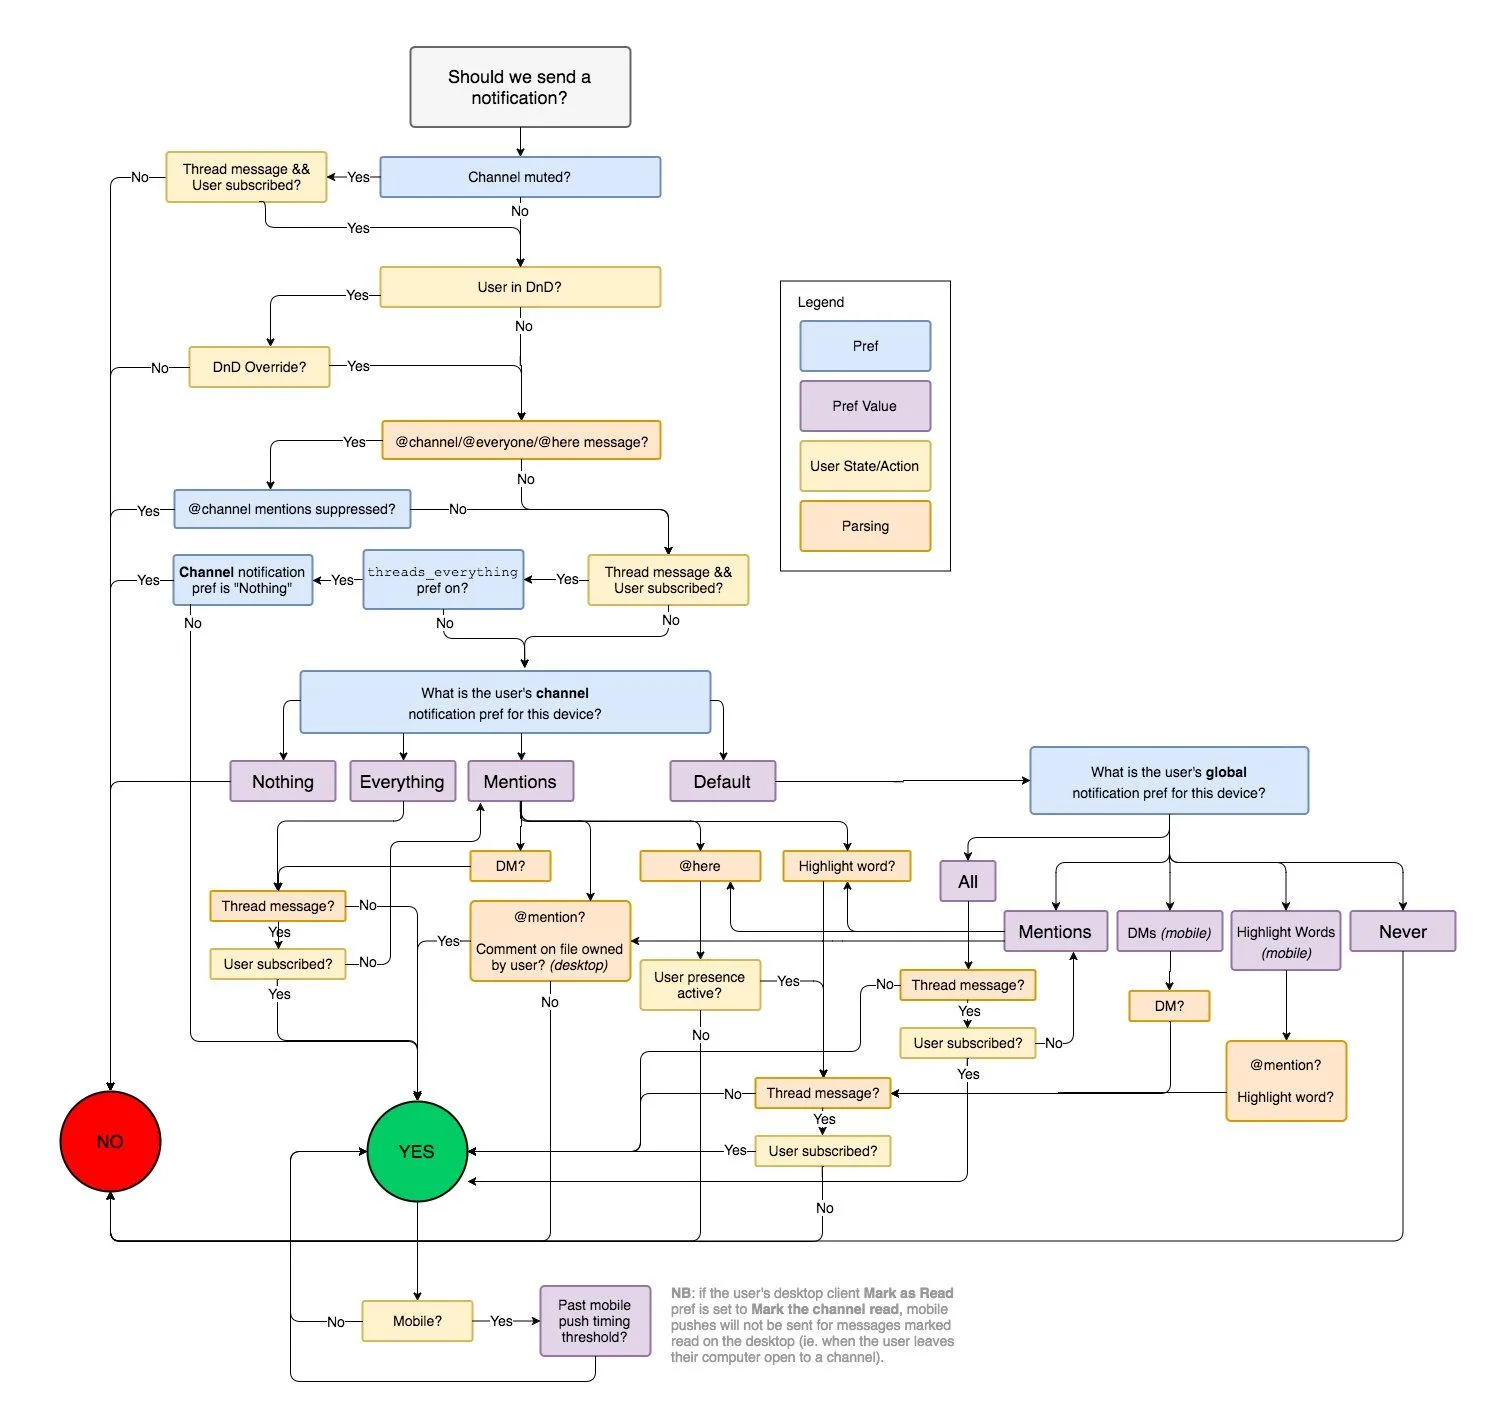 A complex flowchart diagram illustrating all of the possible choices that a user could make that influences whether or not they receive a notification.